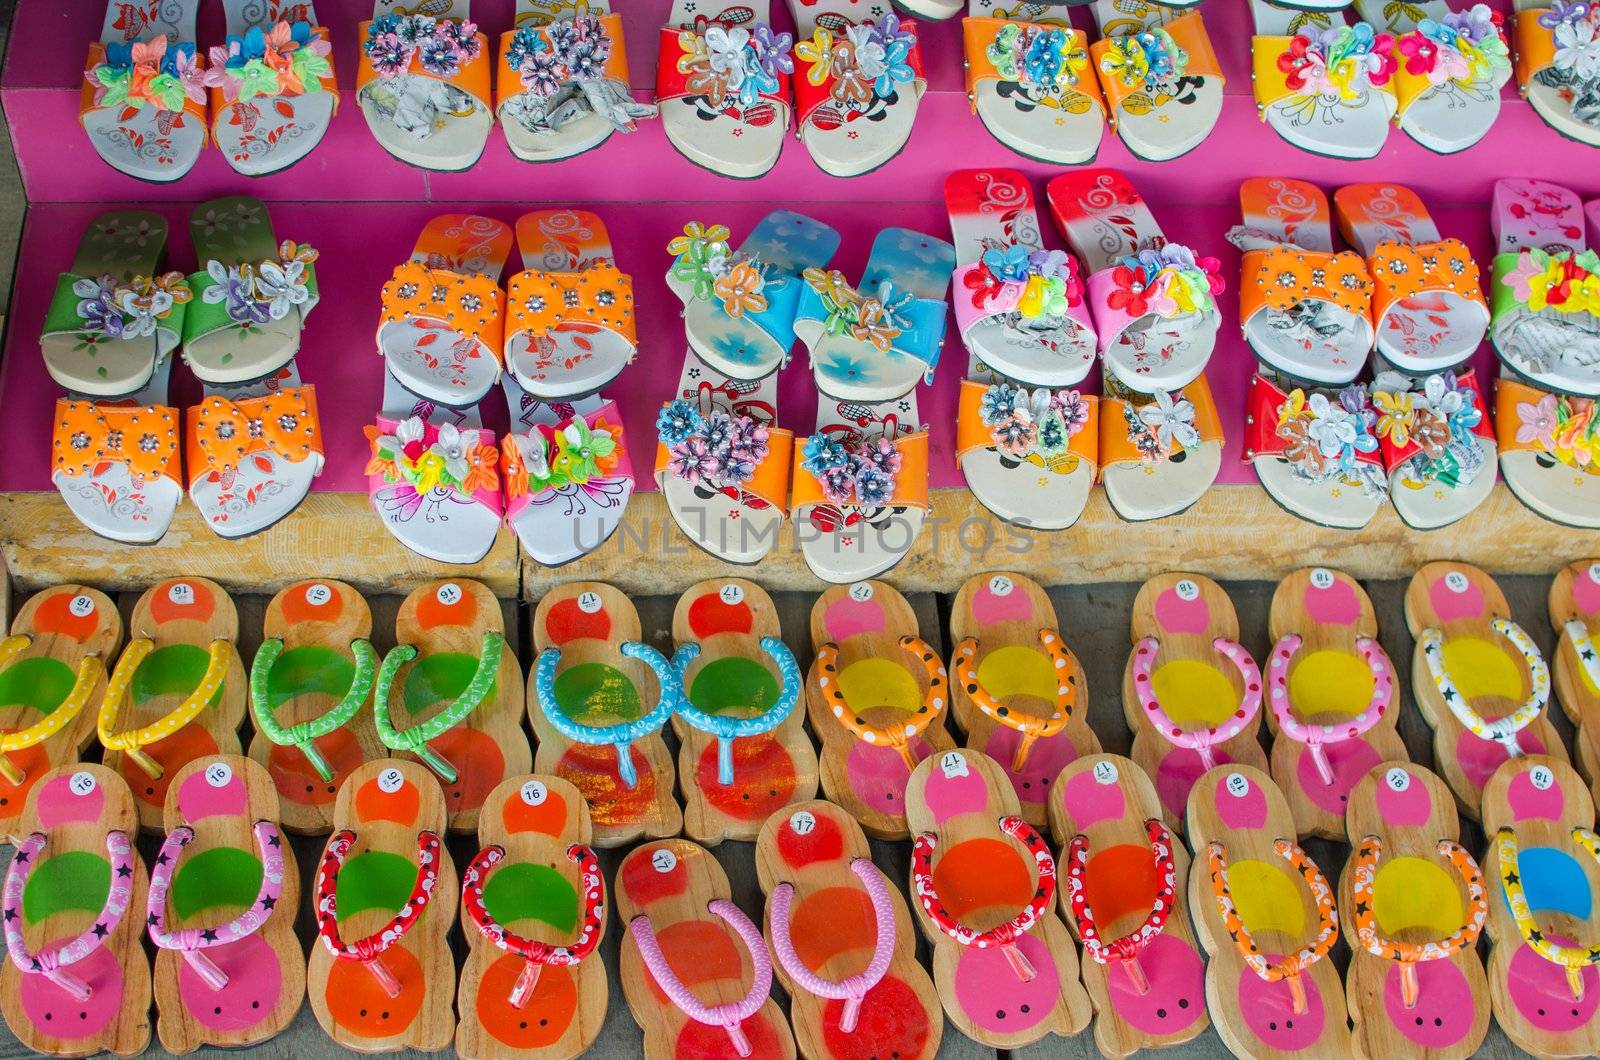 Colorful shoes. by aoo3771